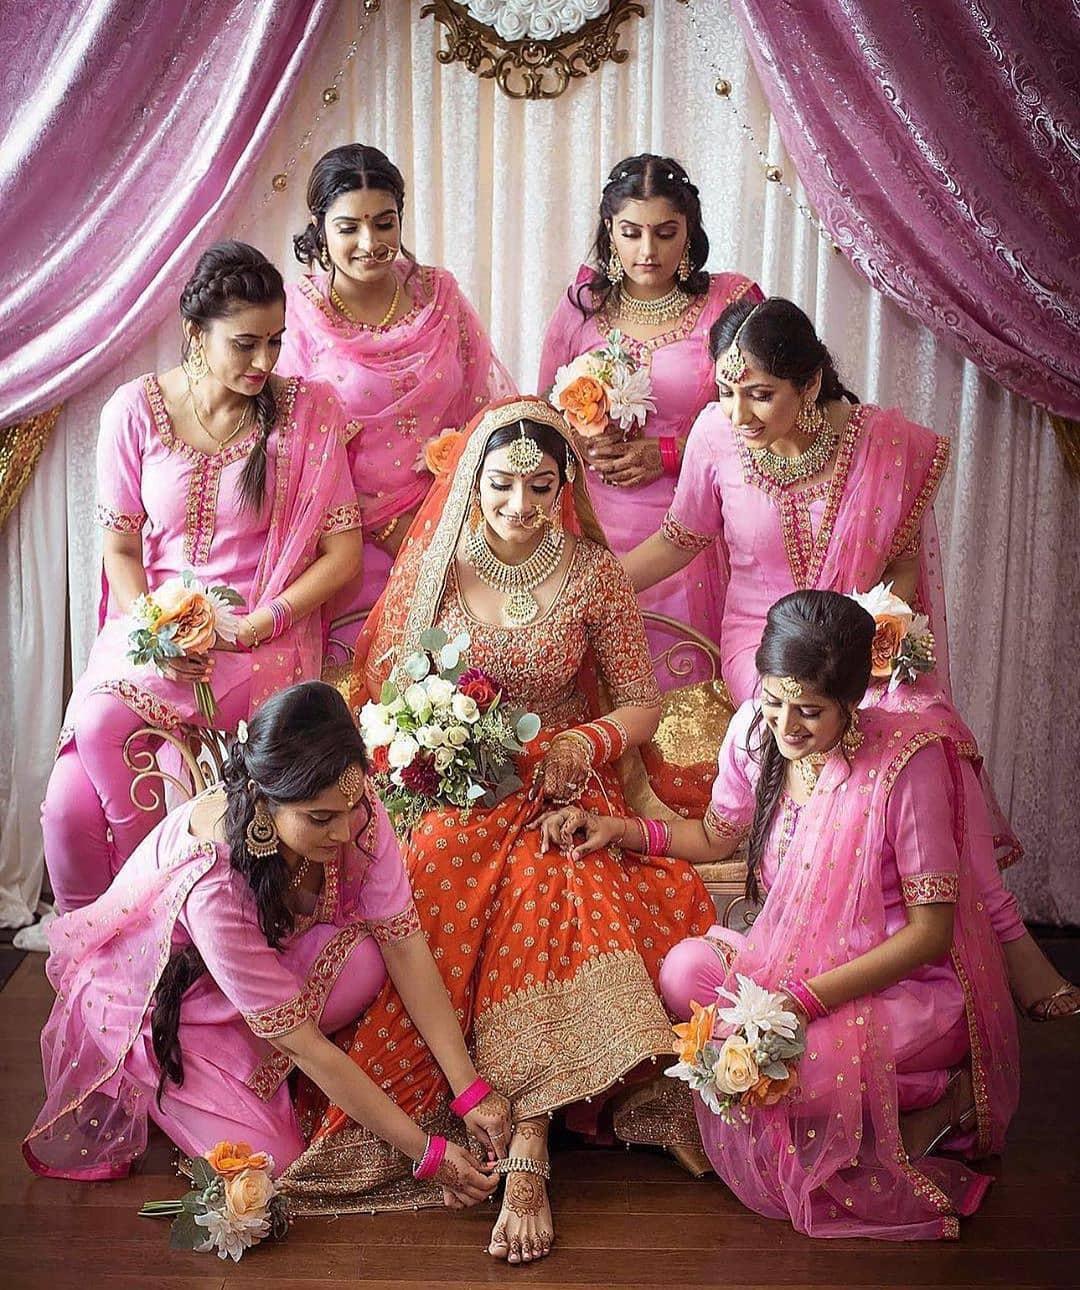 Sister of the Bride - Bride in a Red Bridal Lehenga and Sisters in a Pink  Lehenga wi… | Indian wedding photography poses, Wedding photoshoot poses,  Bride photoshoot